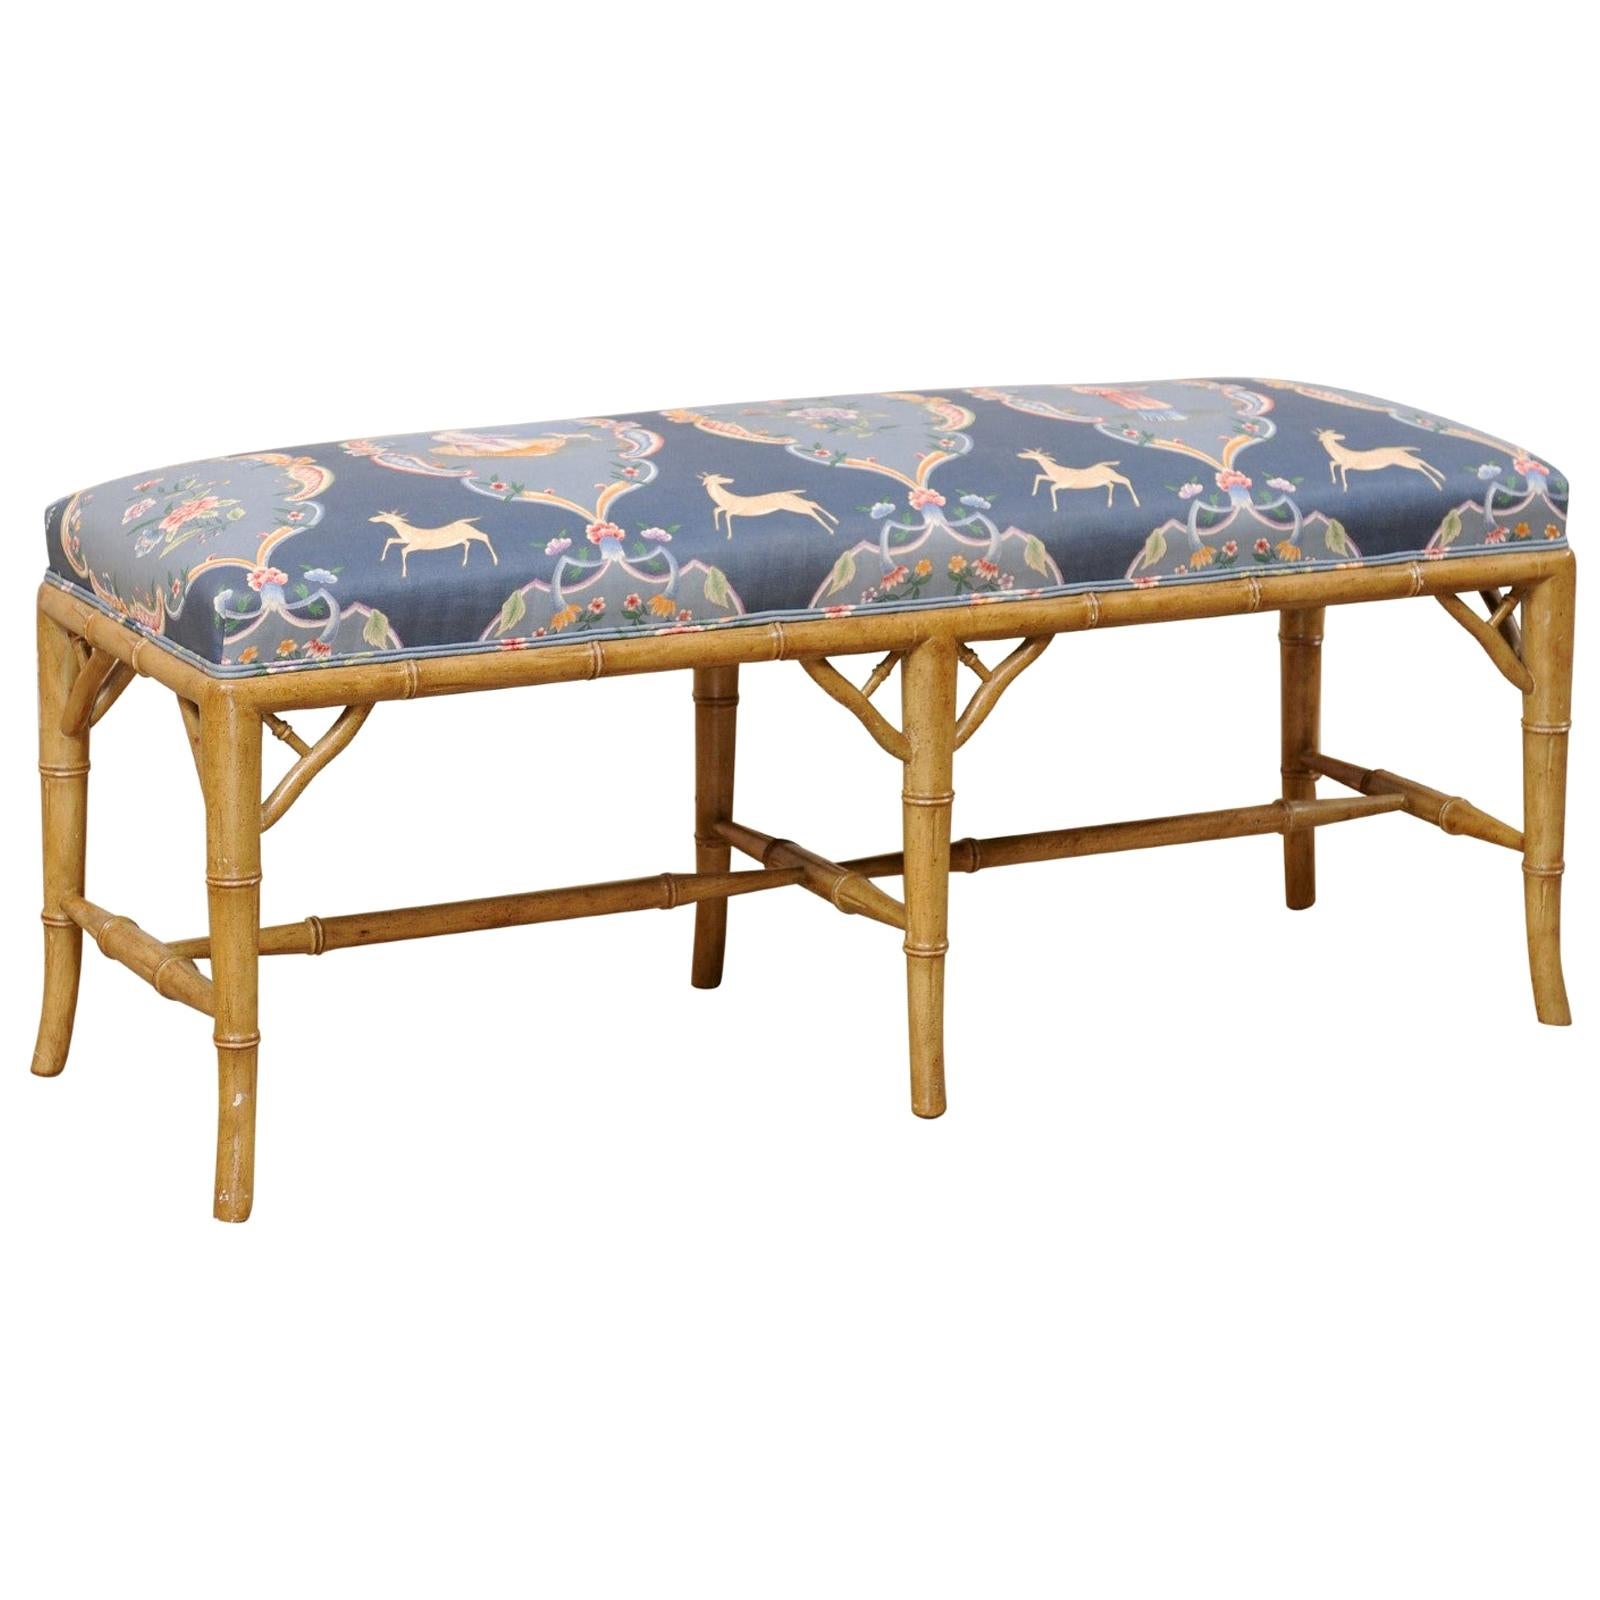 Vintage Faux-Bamboo Carved Wood Bench with Upholstered Seat